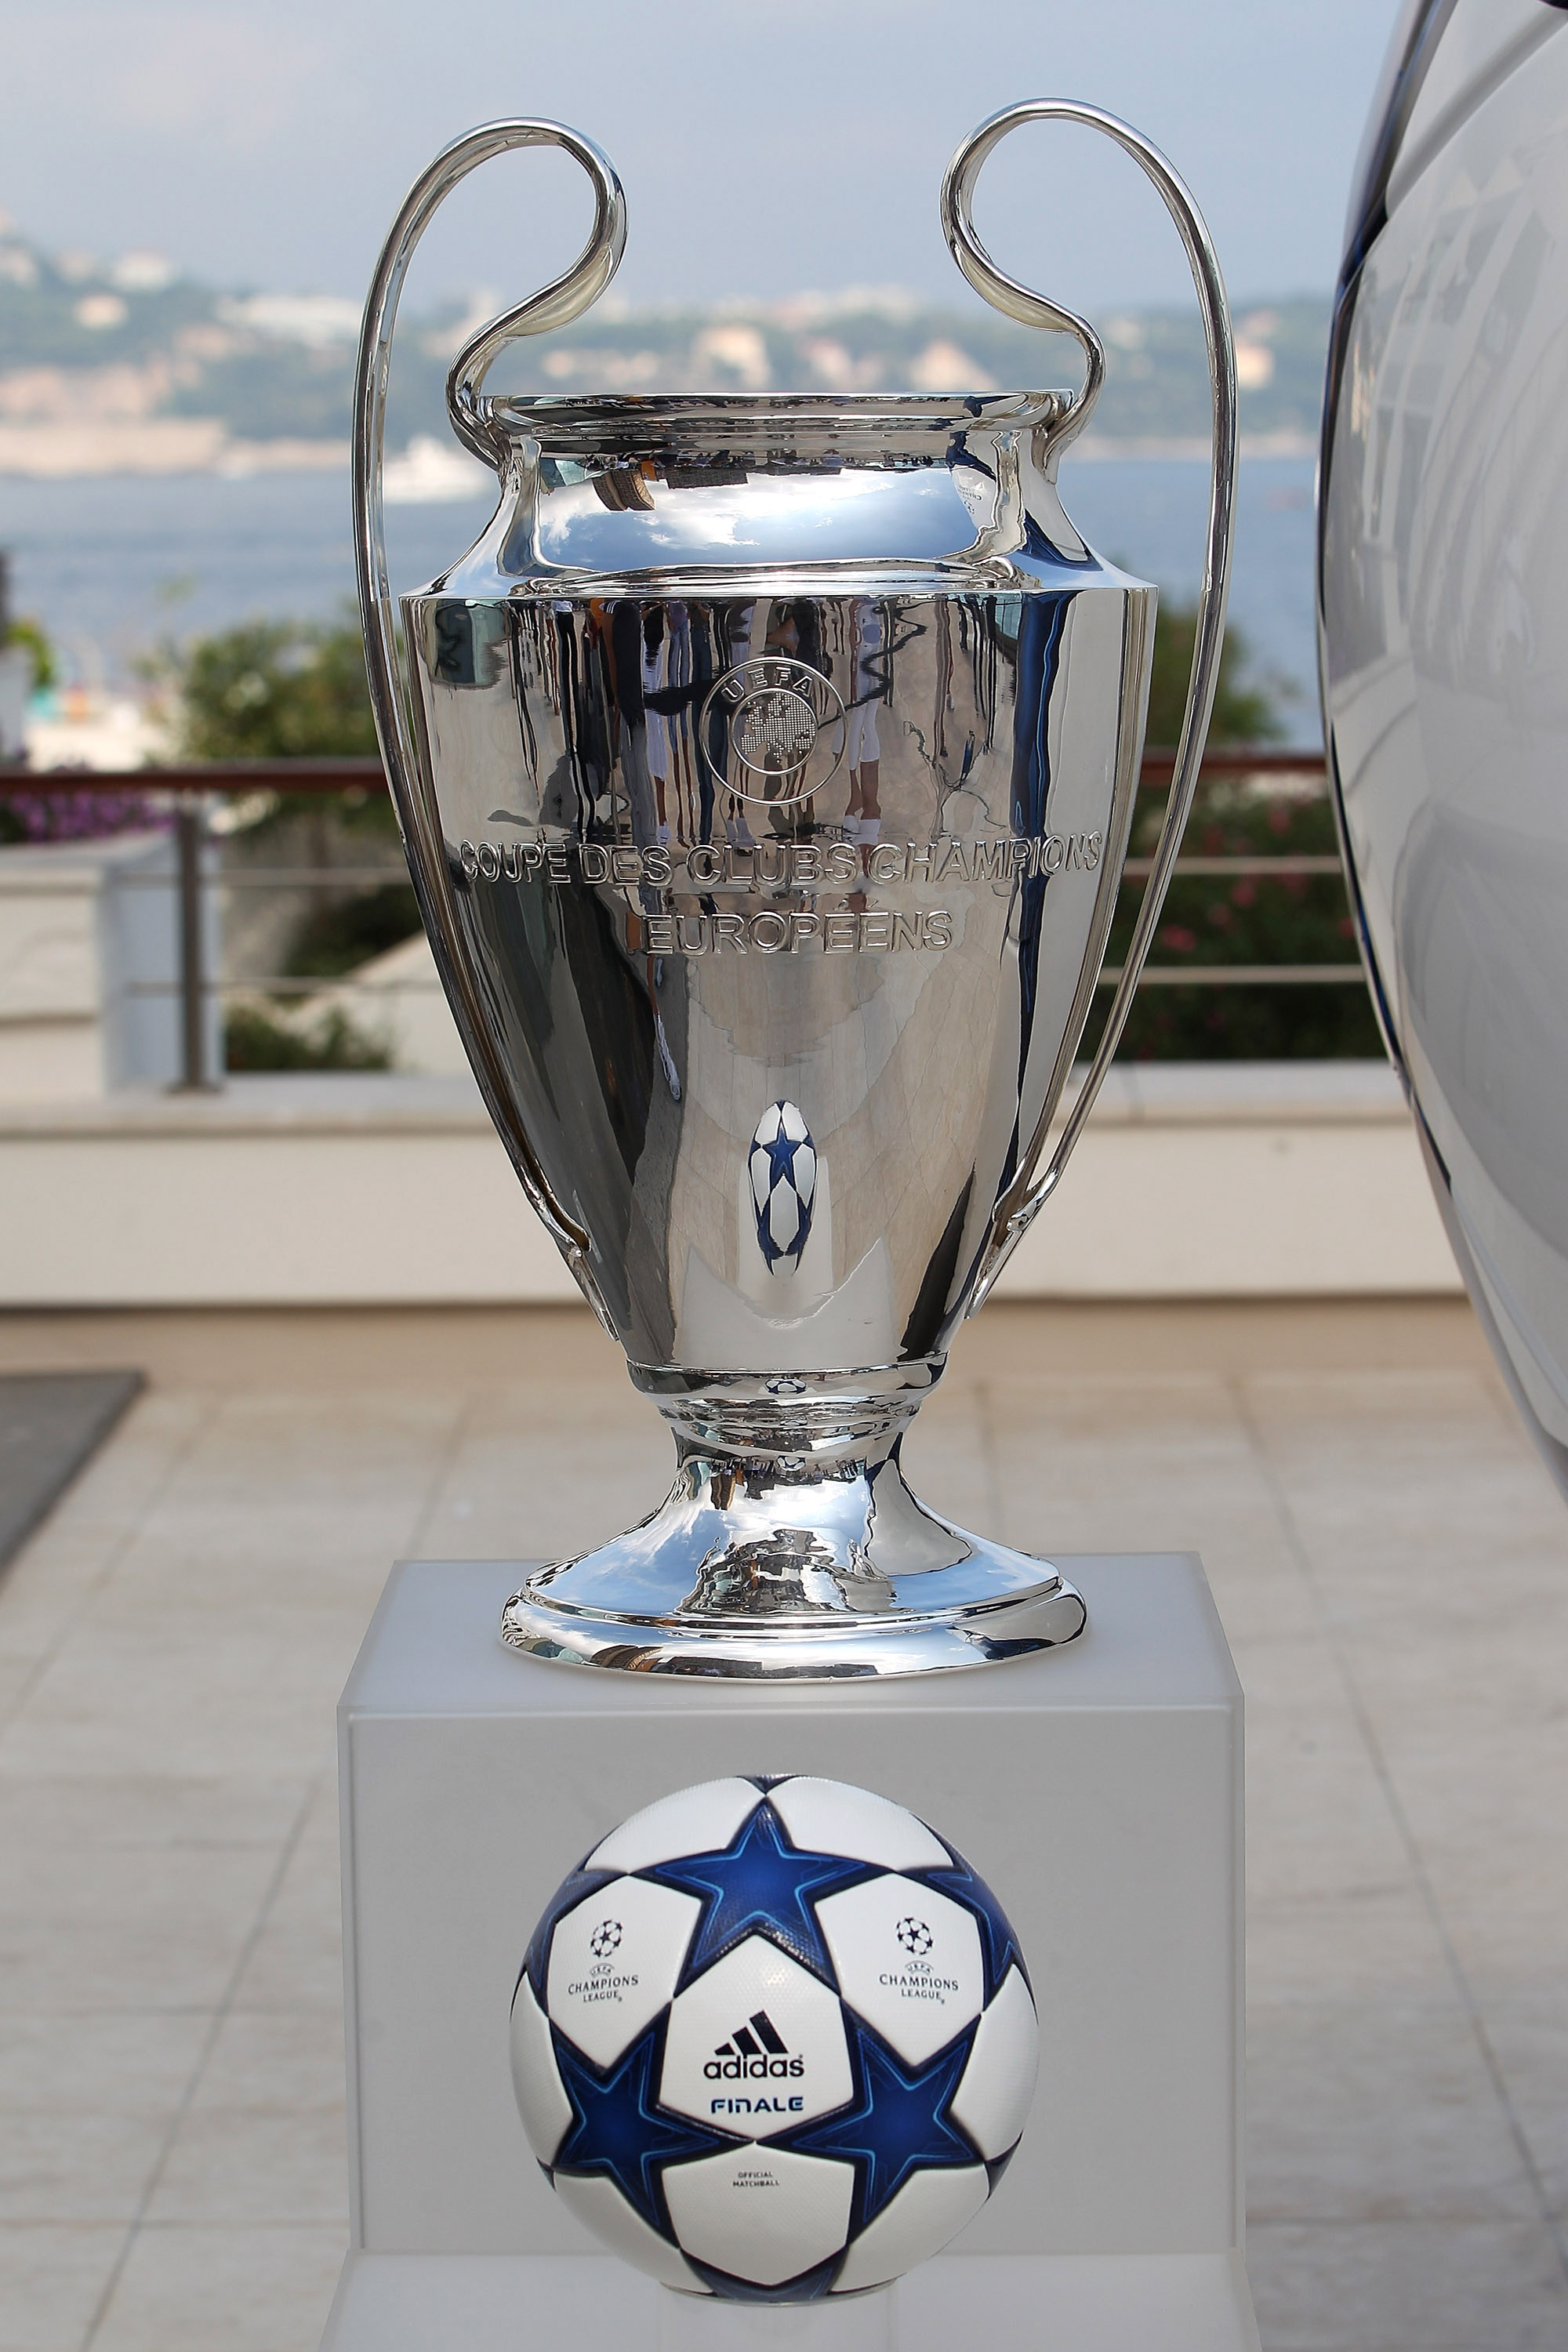 MONACO - AUGUST 26:  An Adidas ball on show alongside the Champions League trophy during the UEFA Champions League Group Stage draw at the Grimaldi Forum on August 26, 2010 in Monaco, Monaco.  (Photo by Michael Steele/Getty Images)